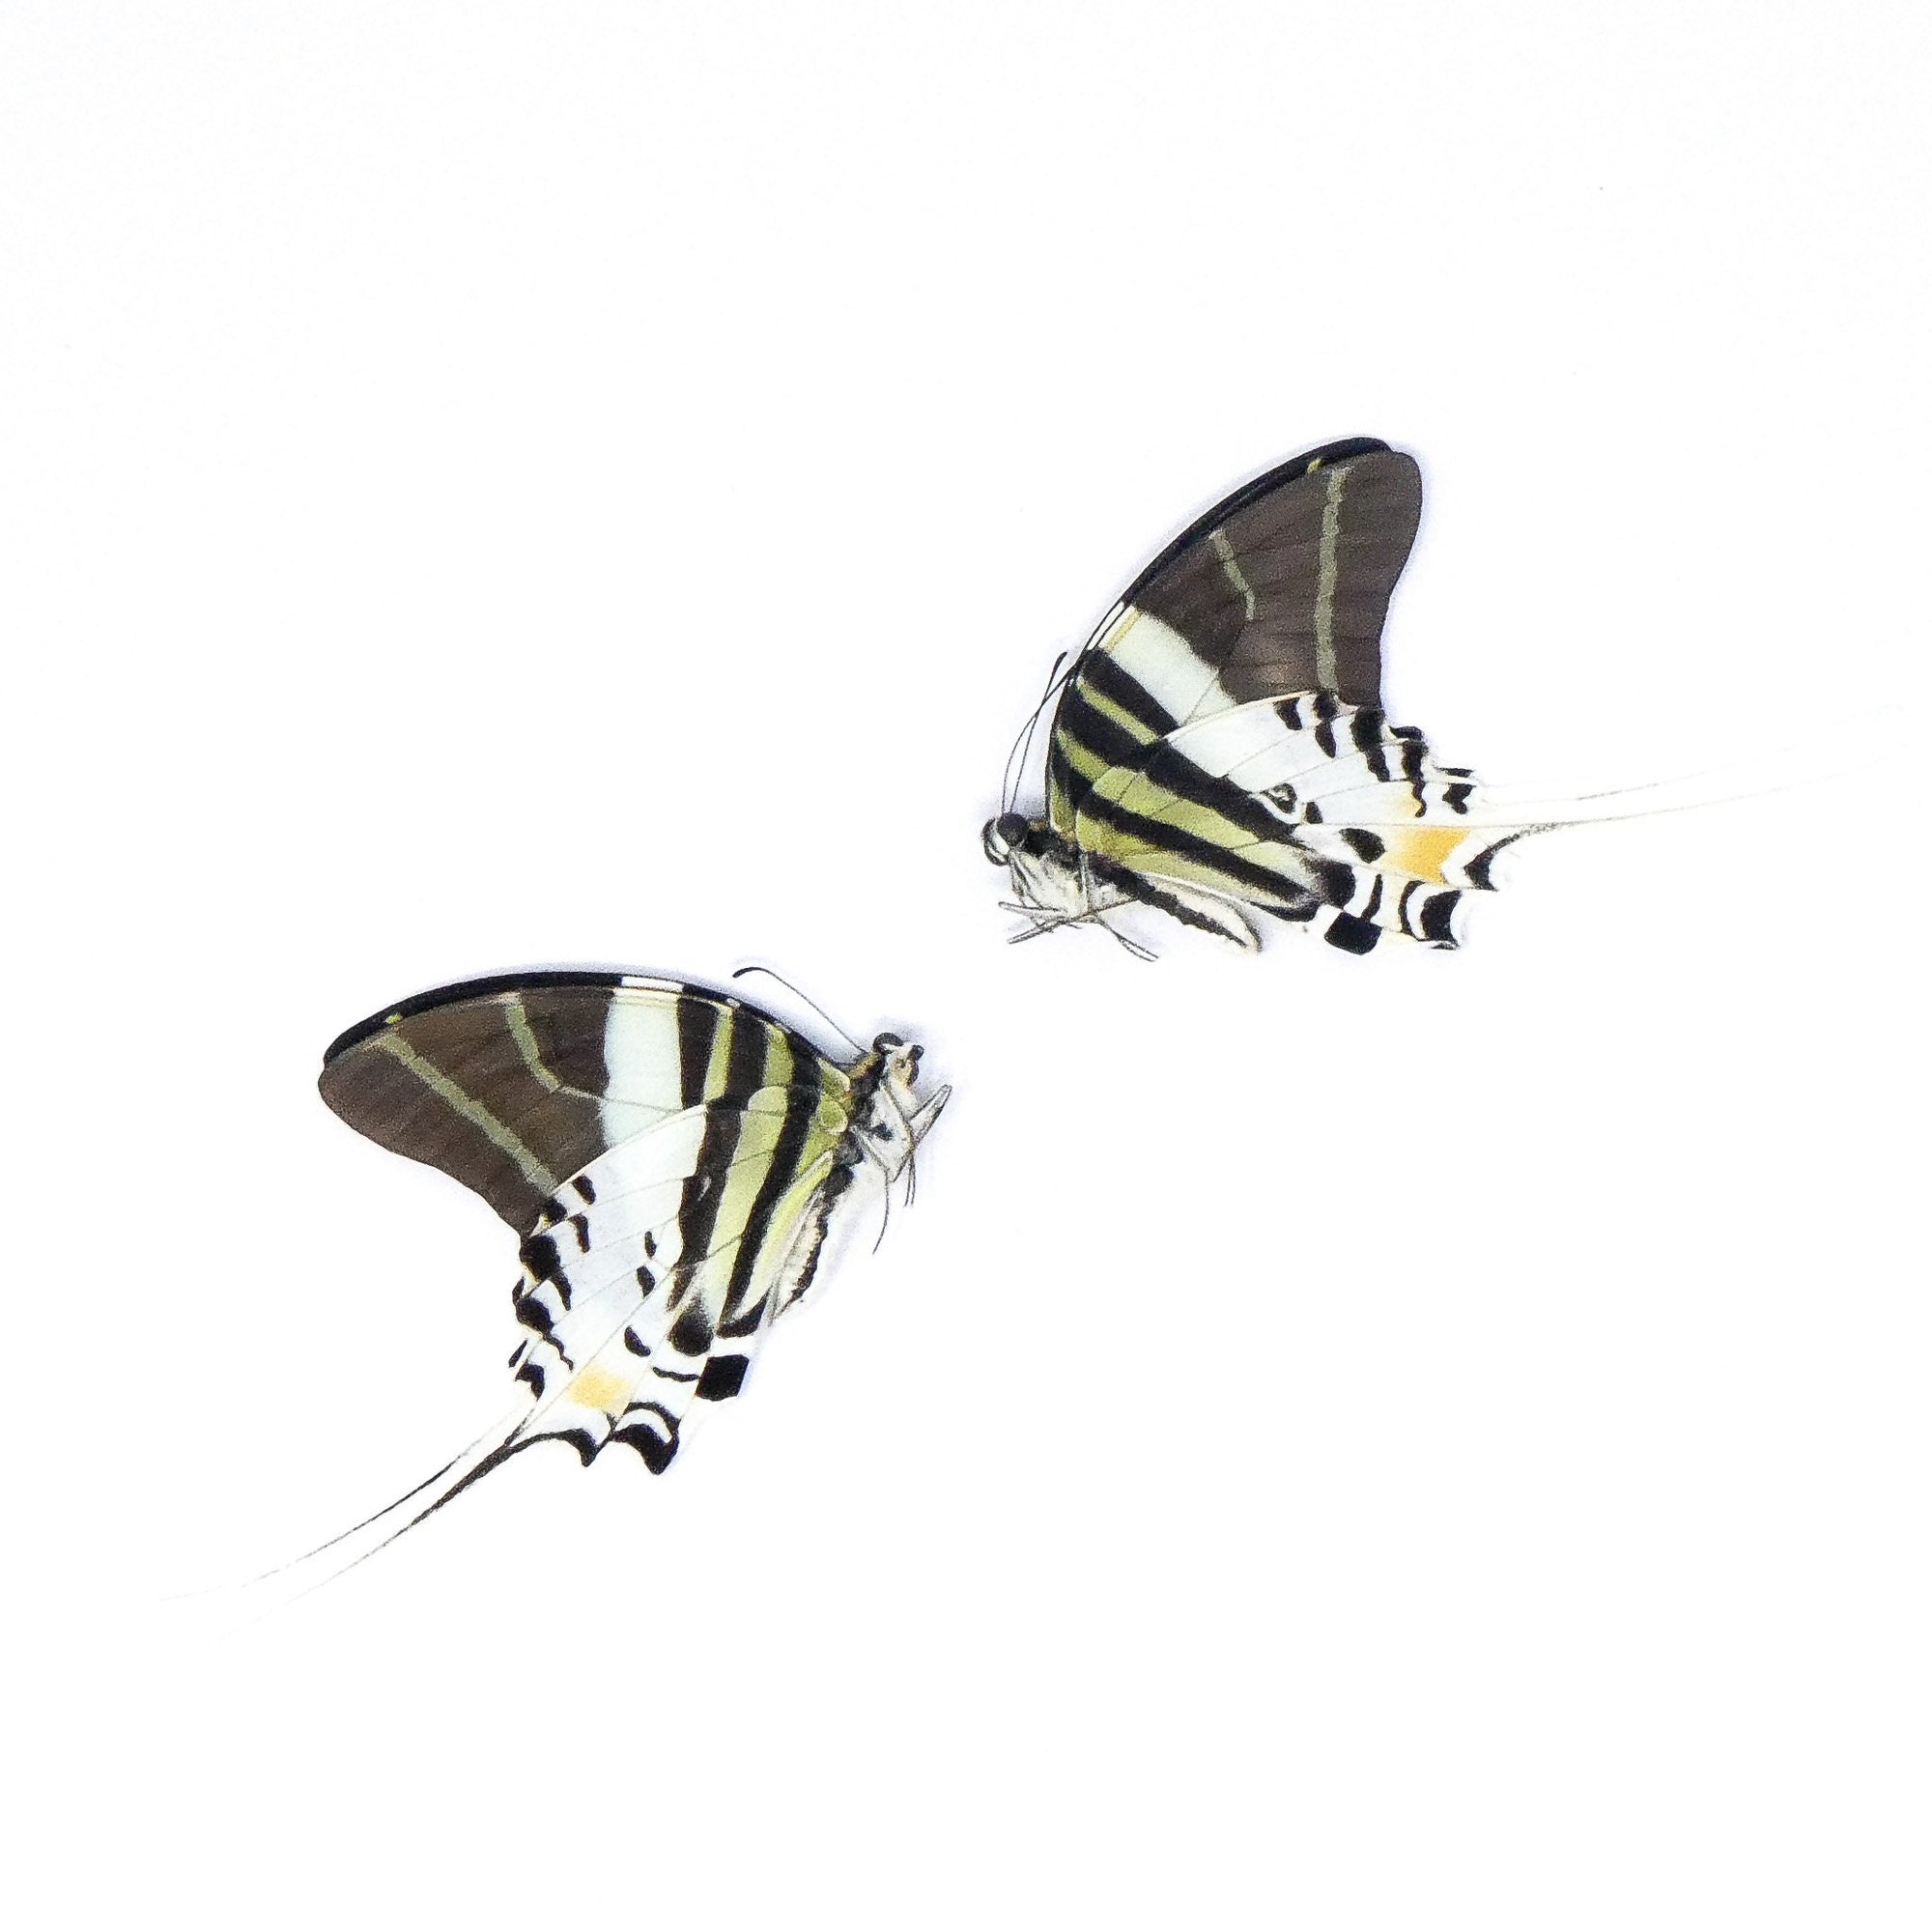 TWO (2) Giant Swallowtail Butterflies | Graphium androcles | A1 Real Dry-Preserved Butterflies | Unmounted Entomology Taxidermy Specimens